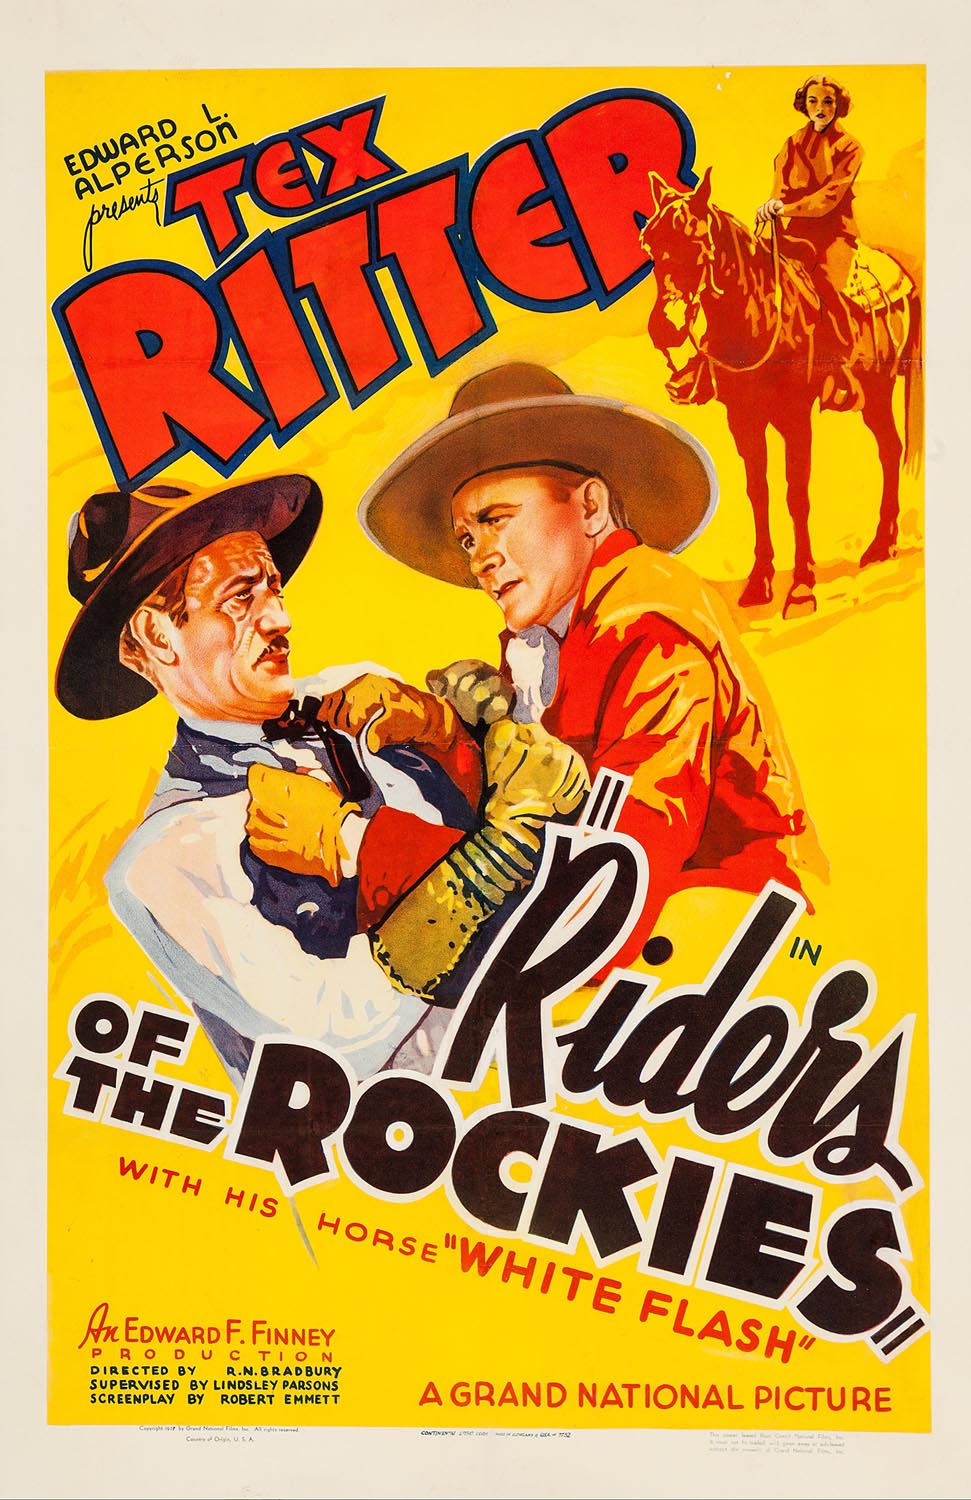 RIDERS OF THE ROCKIES